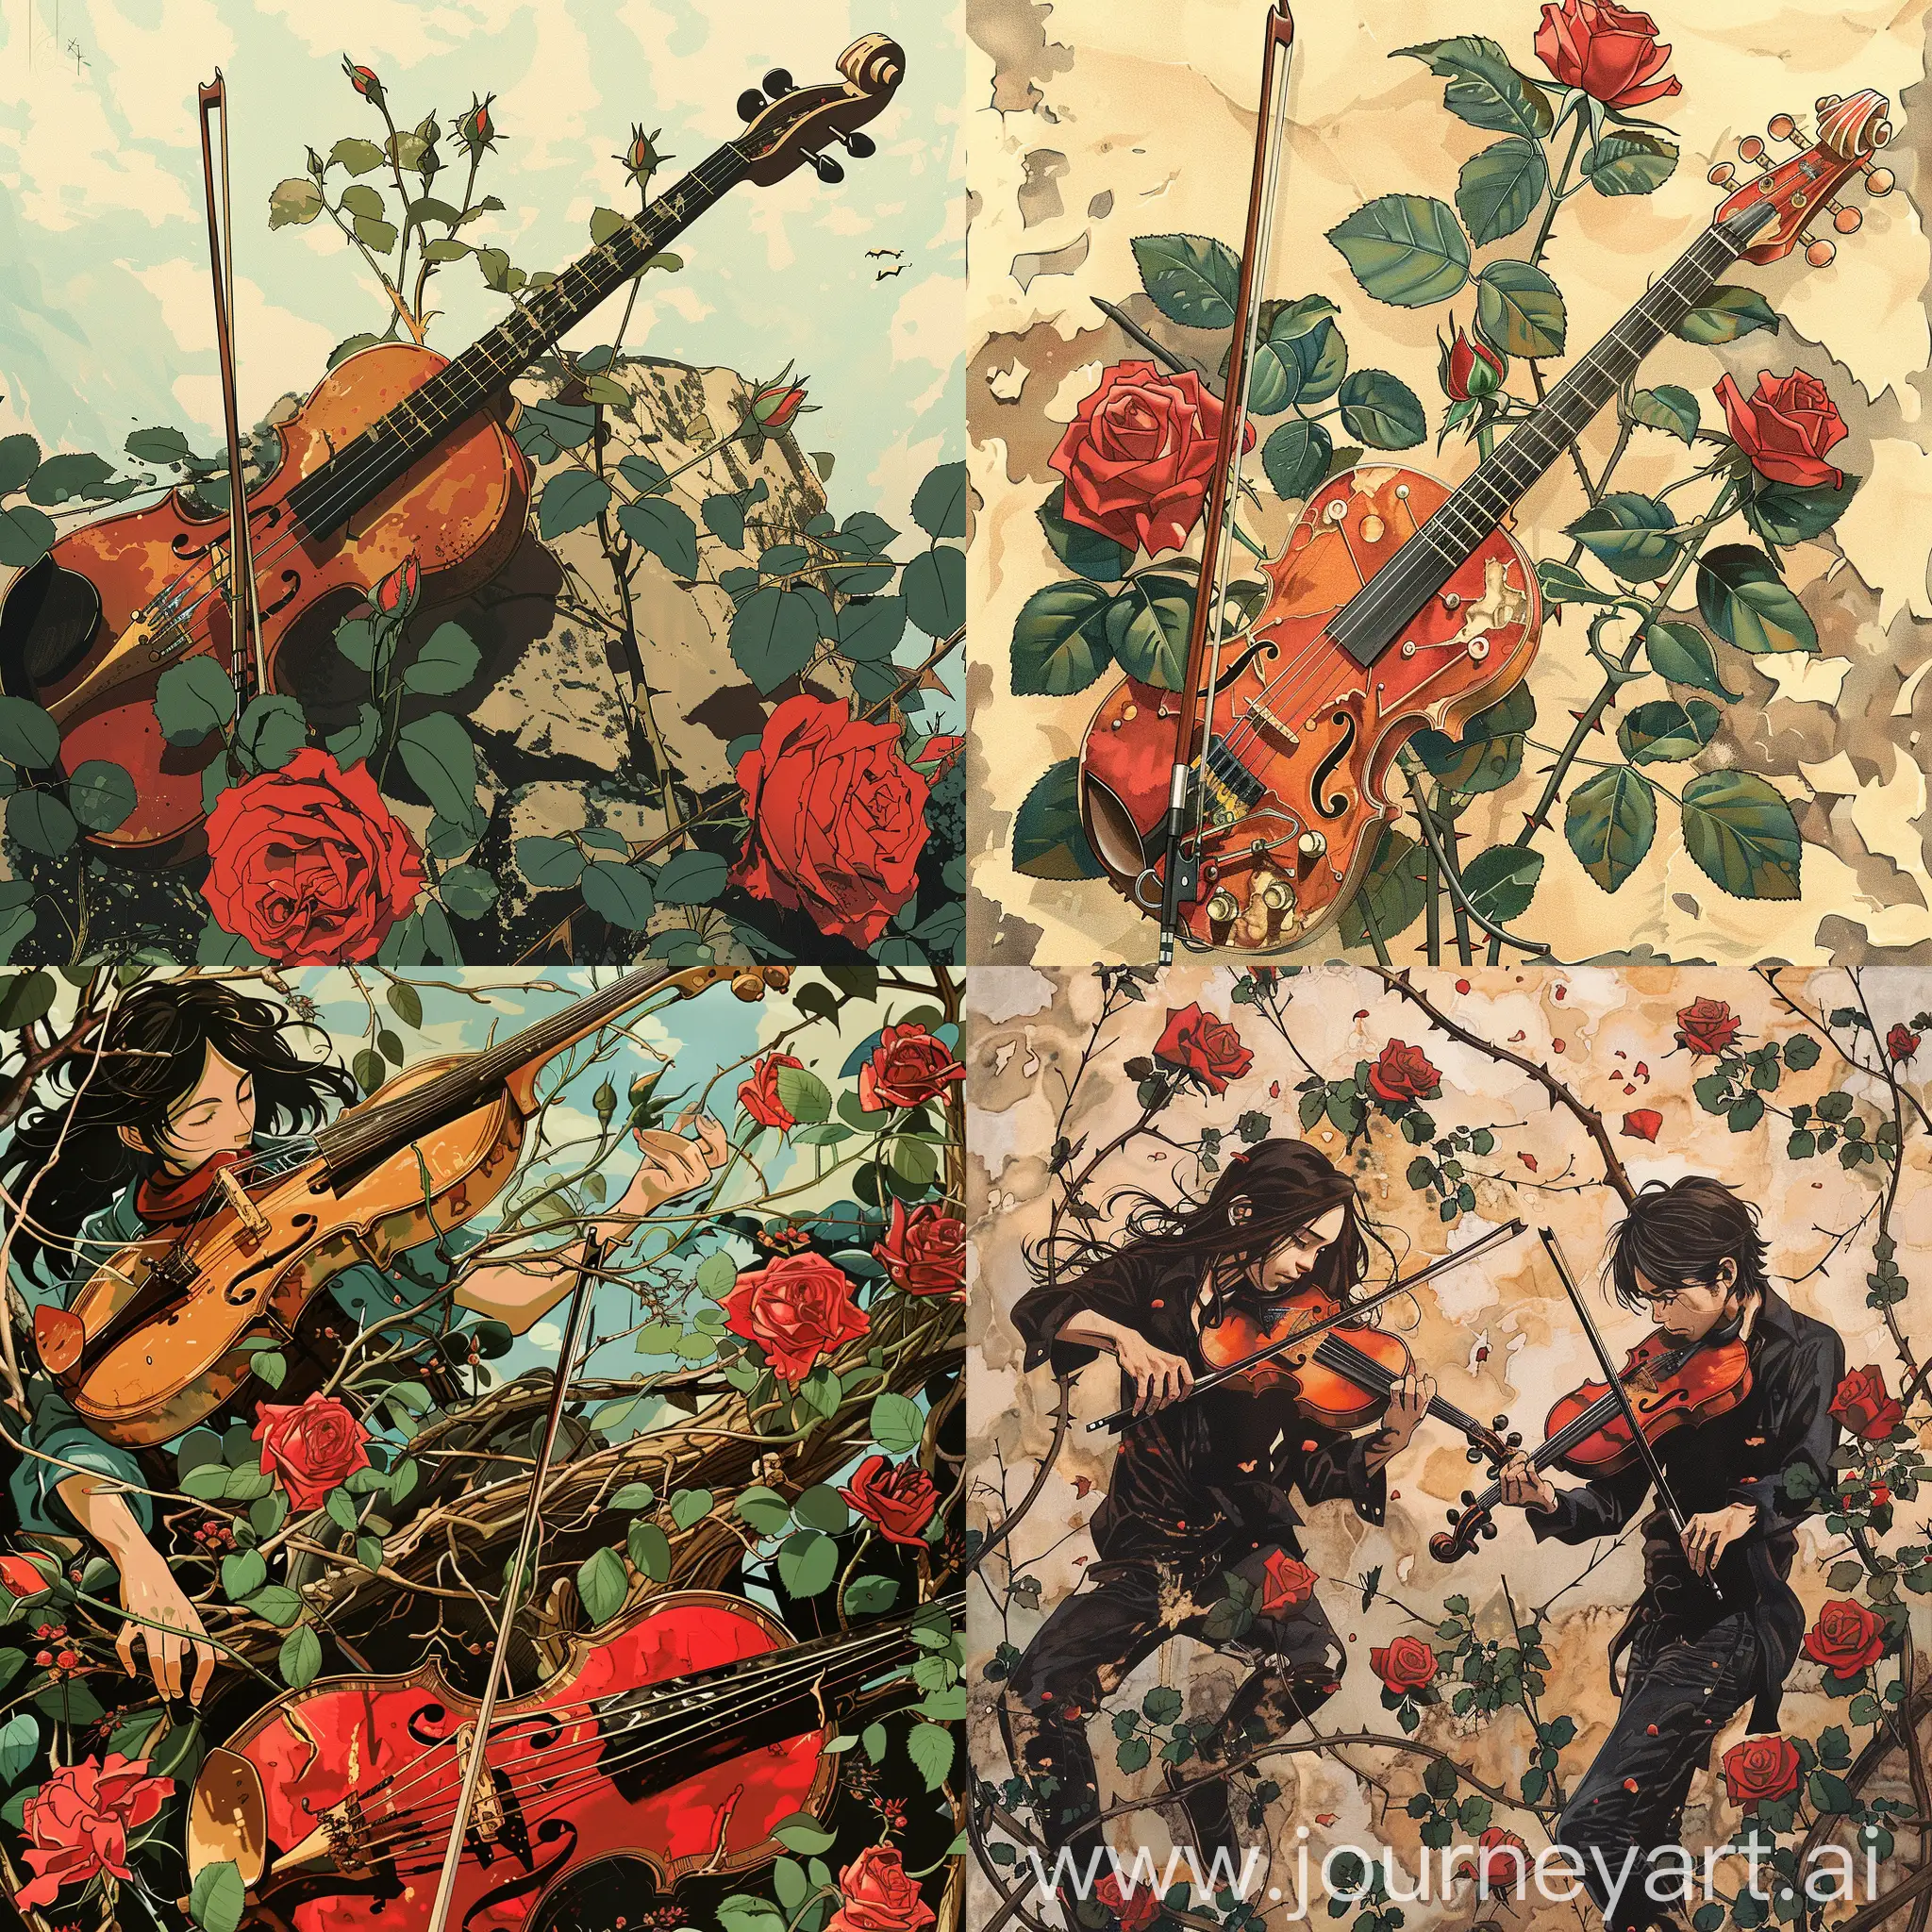 Rock-Guitar-and-Violin-Duet-Fusion-of-Rock-and-Classical-Music-with-Floral-Motifs